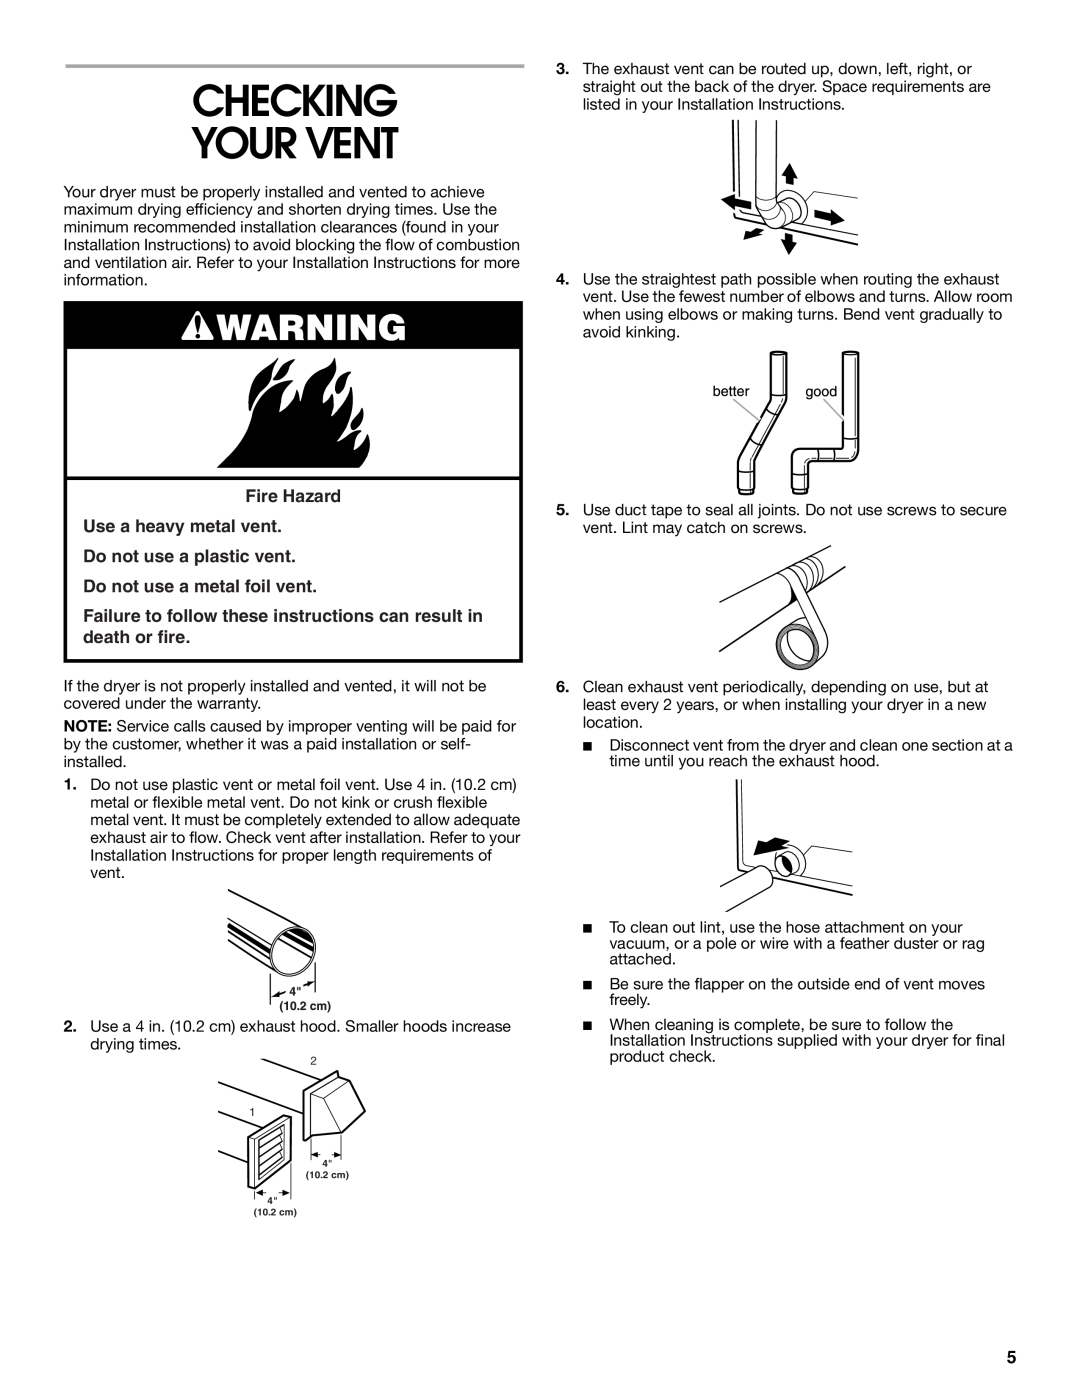 Estate 8318478A manual Checking Your Vent, Fire Hazard Use a heavy metal vent Do not use a plastic vent 